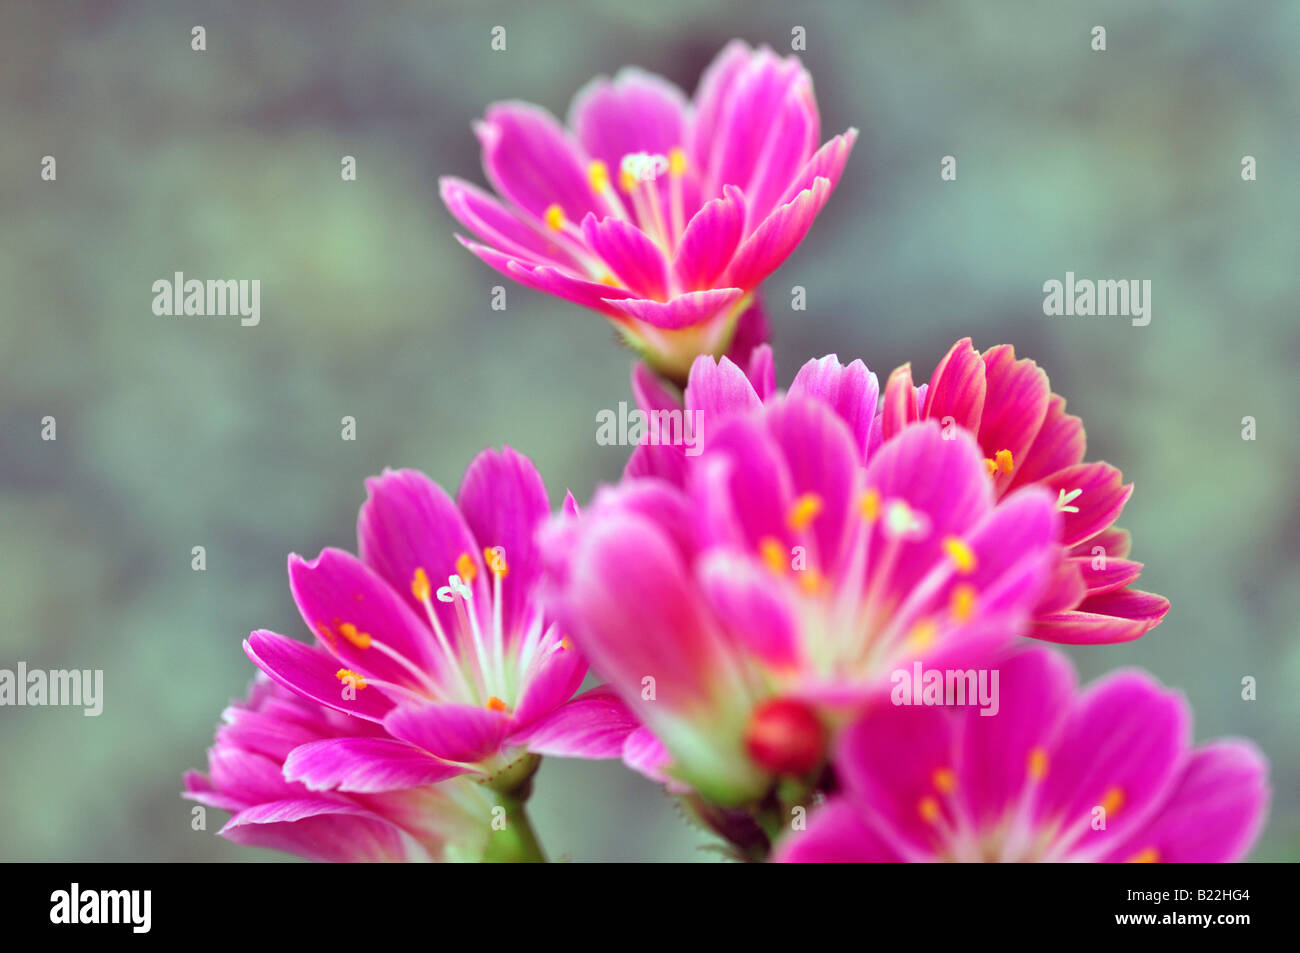 Pink and white Lewisia Cotyledon bitter root hybrid flowers bloom blossom closeup close up marco portrait Stock Photo